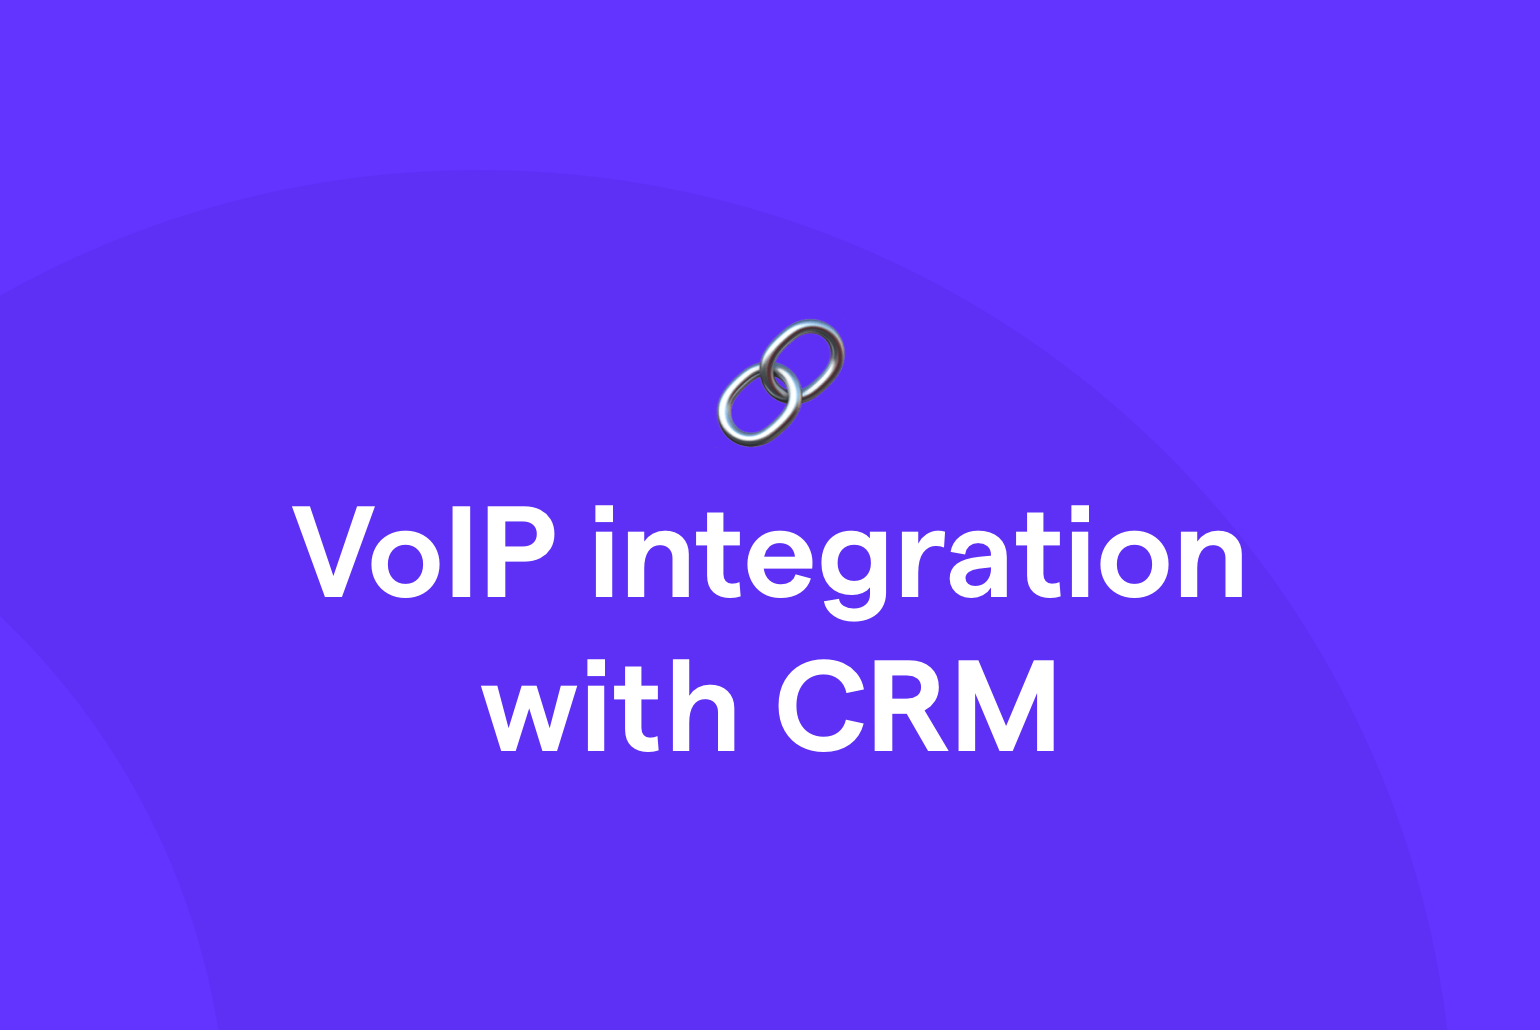 VoIP integration with CRM